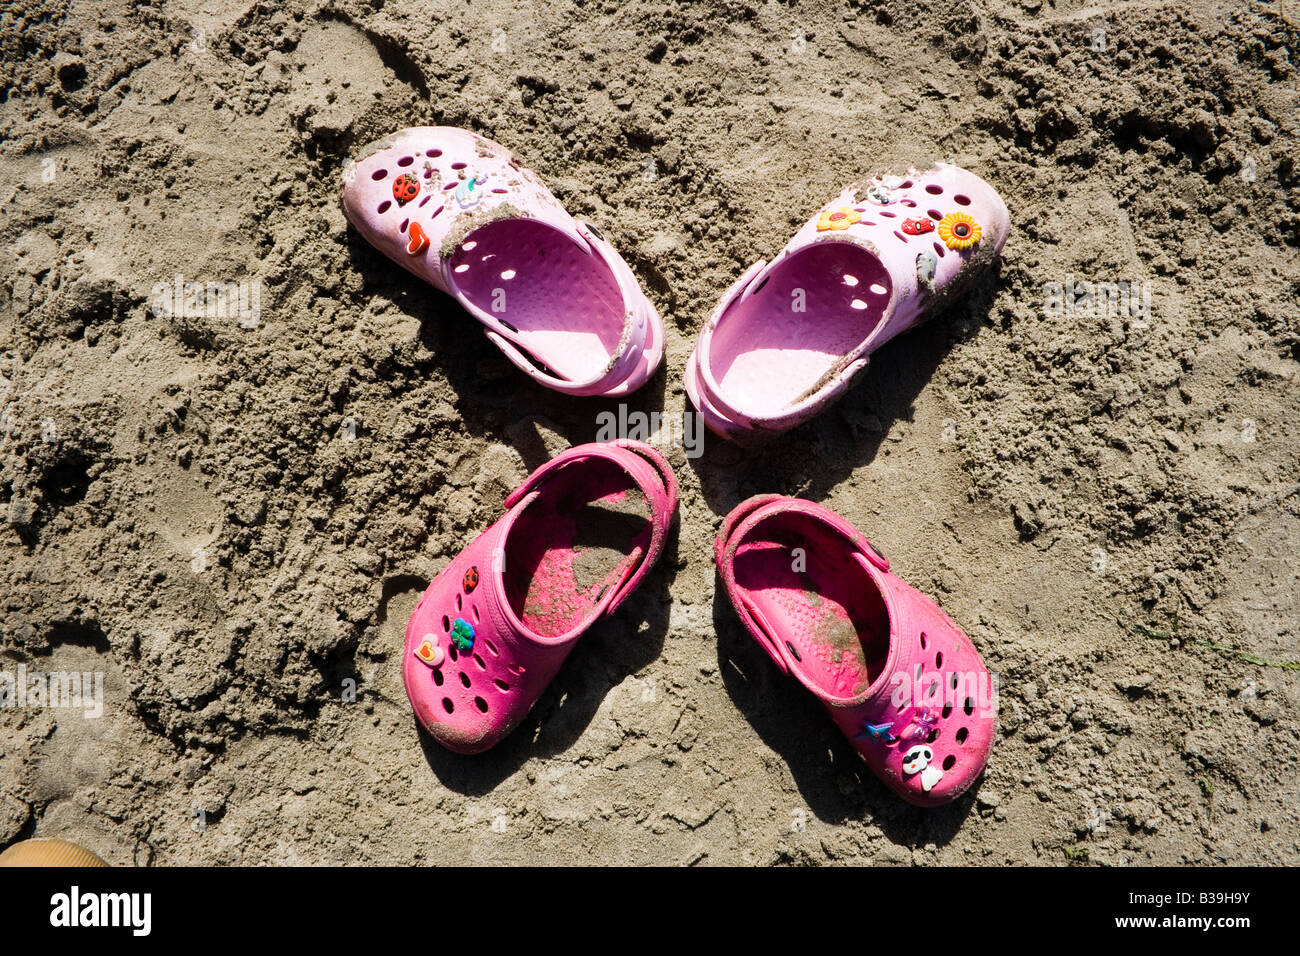 Four pink beach sandals in a cross formation Stock Photo